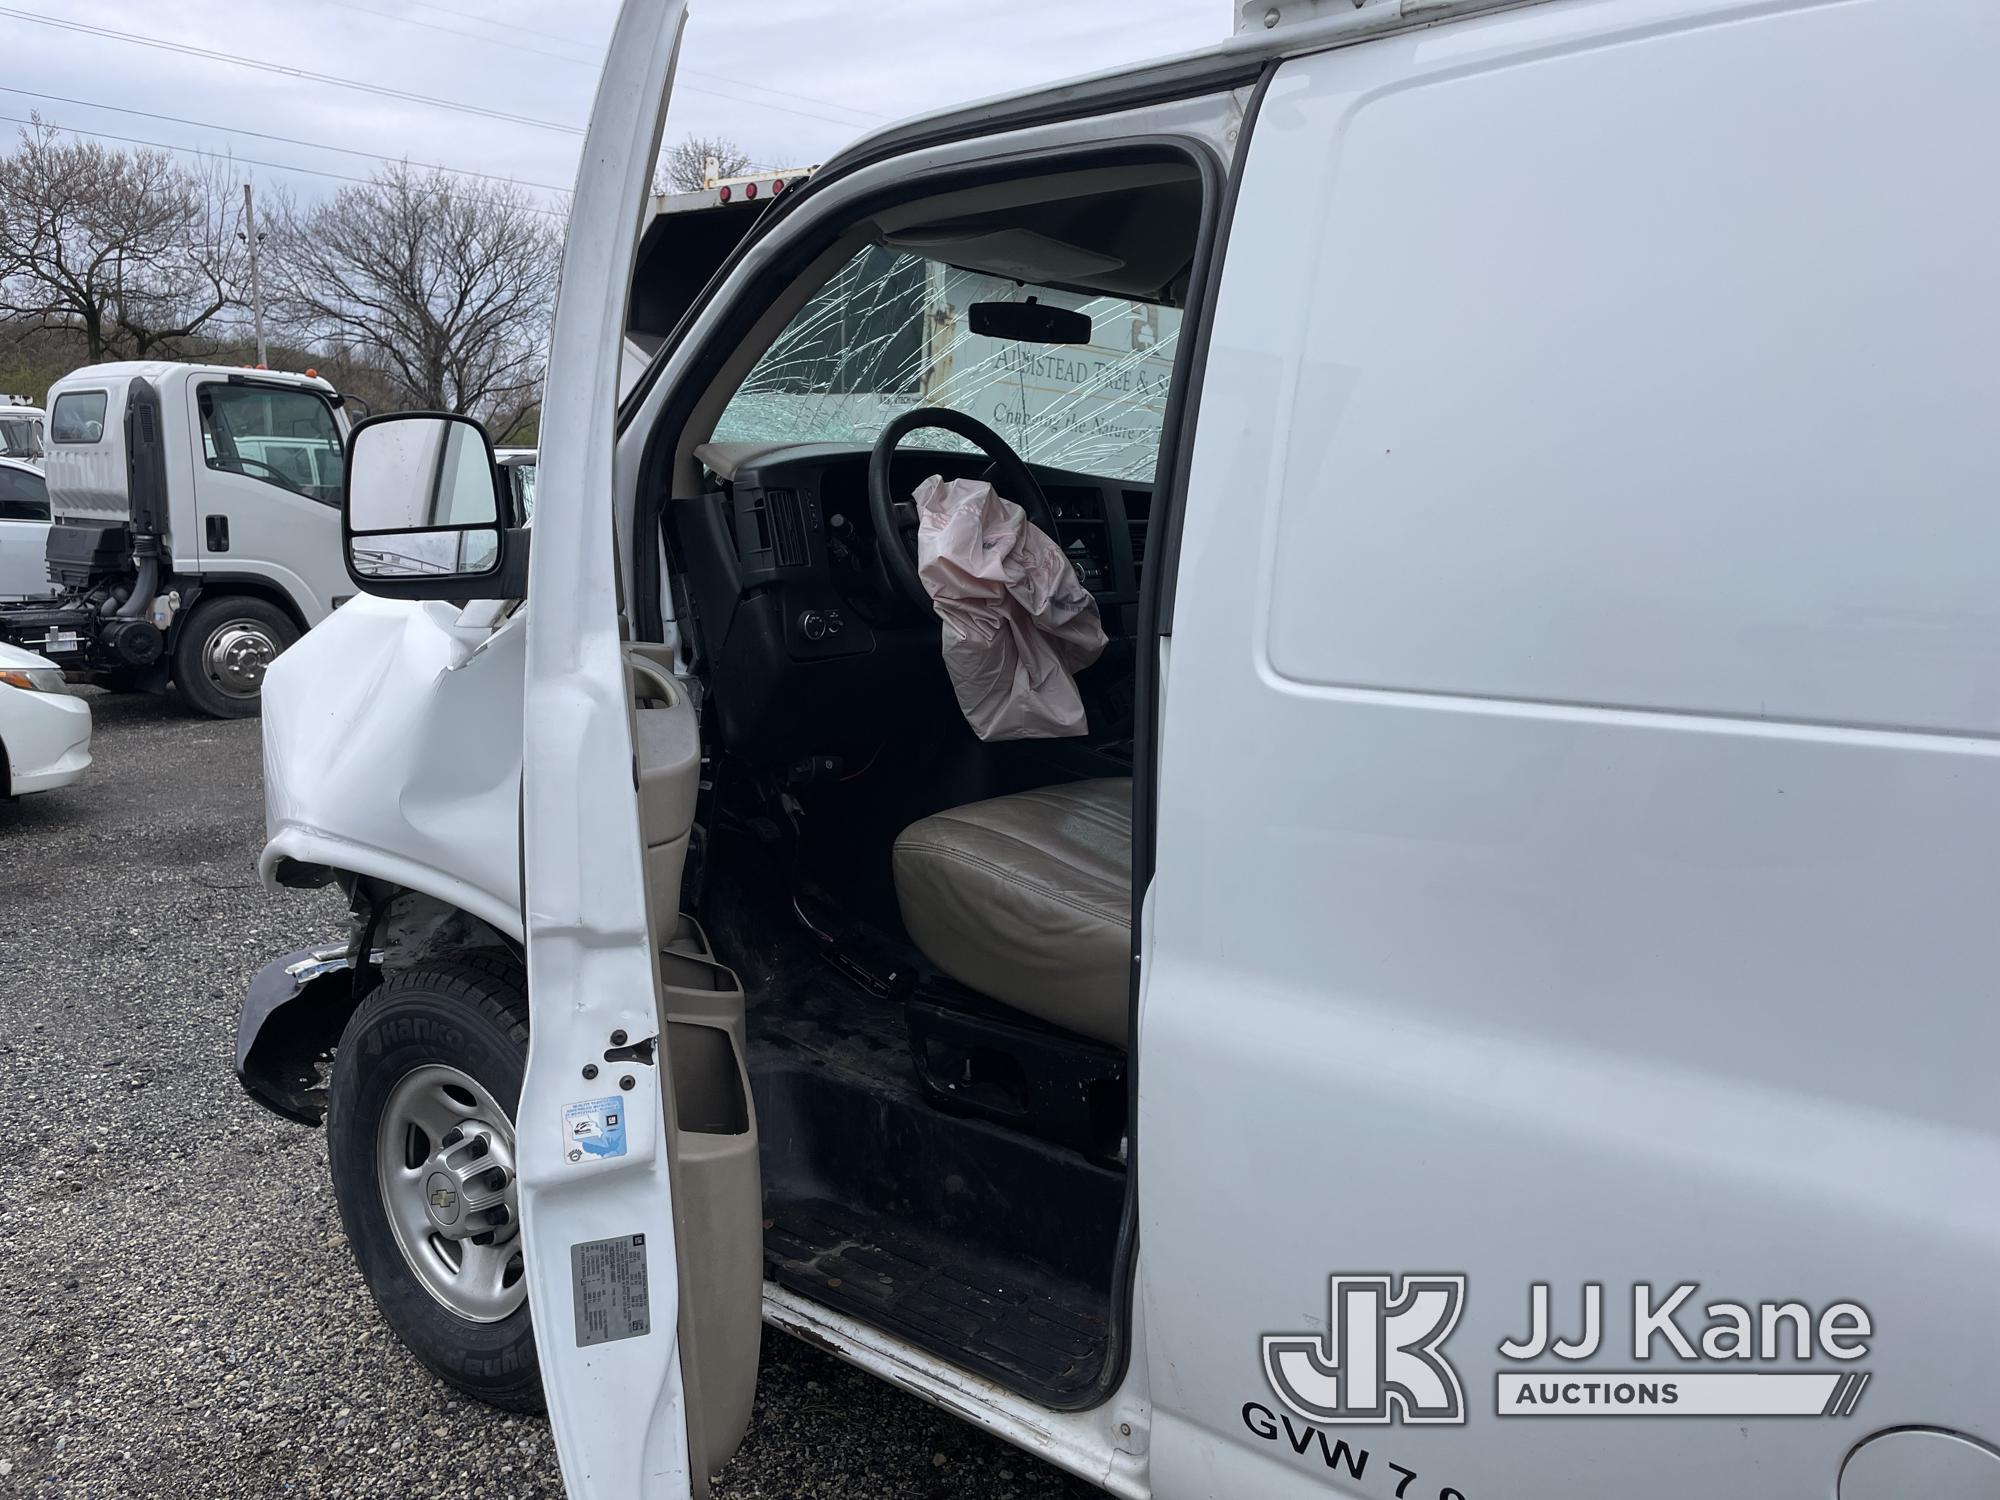 (Plymouth Meeting, PA) 2013 Chevrolet Express G3500 Cargo Van Wrecked Air Bags Deployed, Not Running